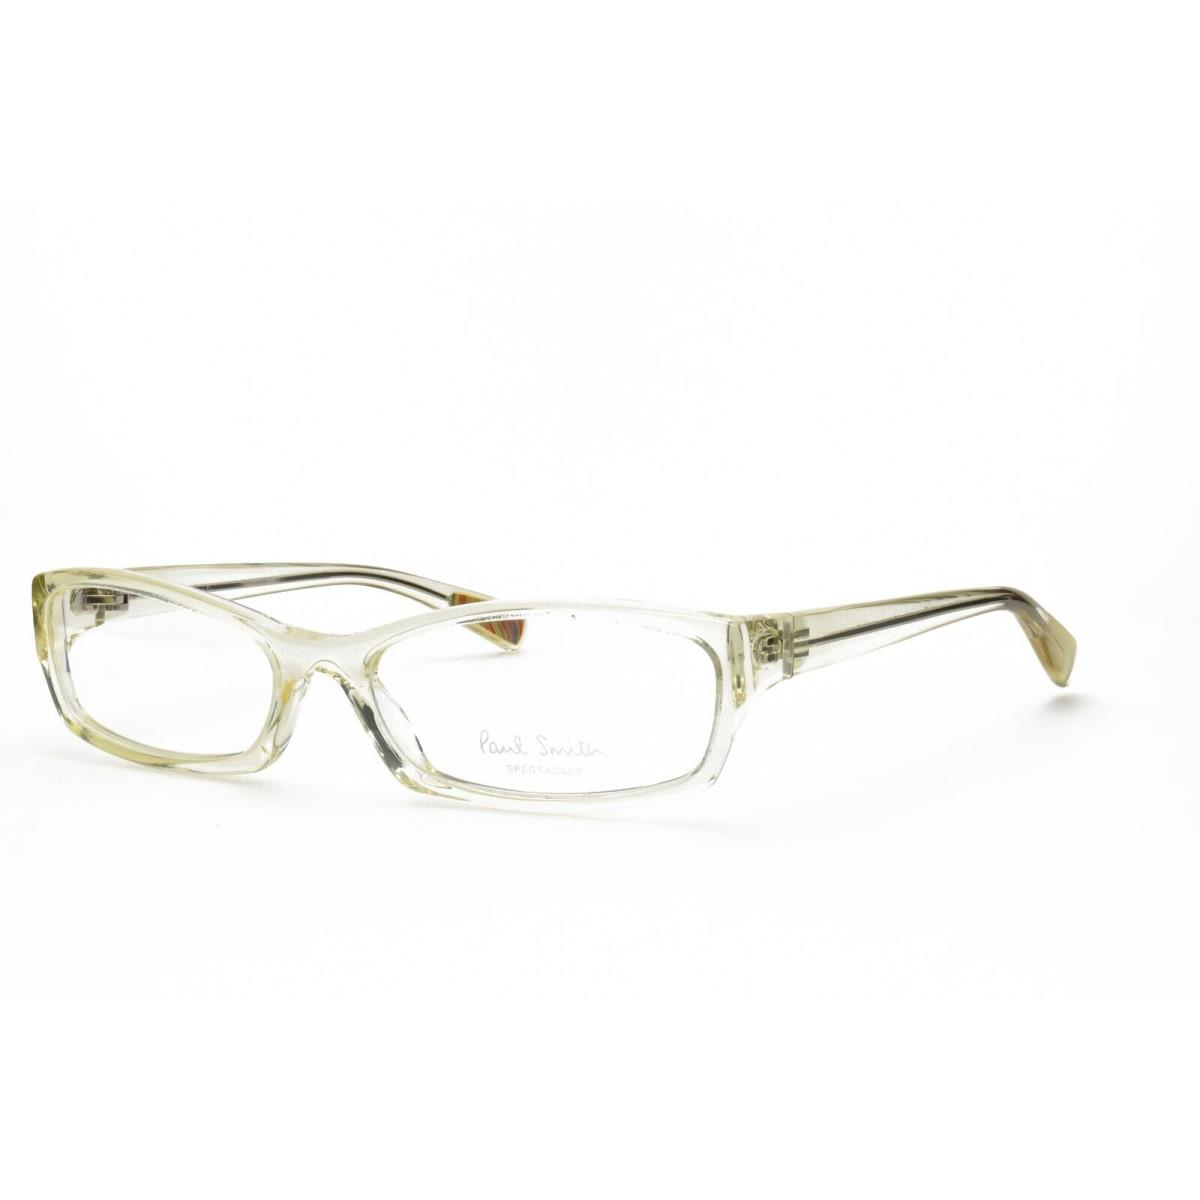 Paul Smith PS 298 Chpne Eyeglasses Frames Only 55-16-130